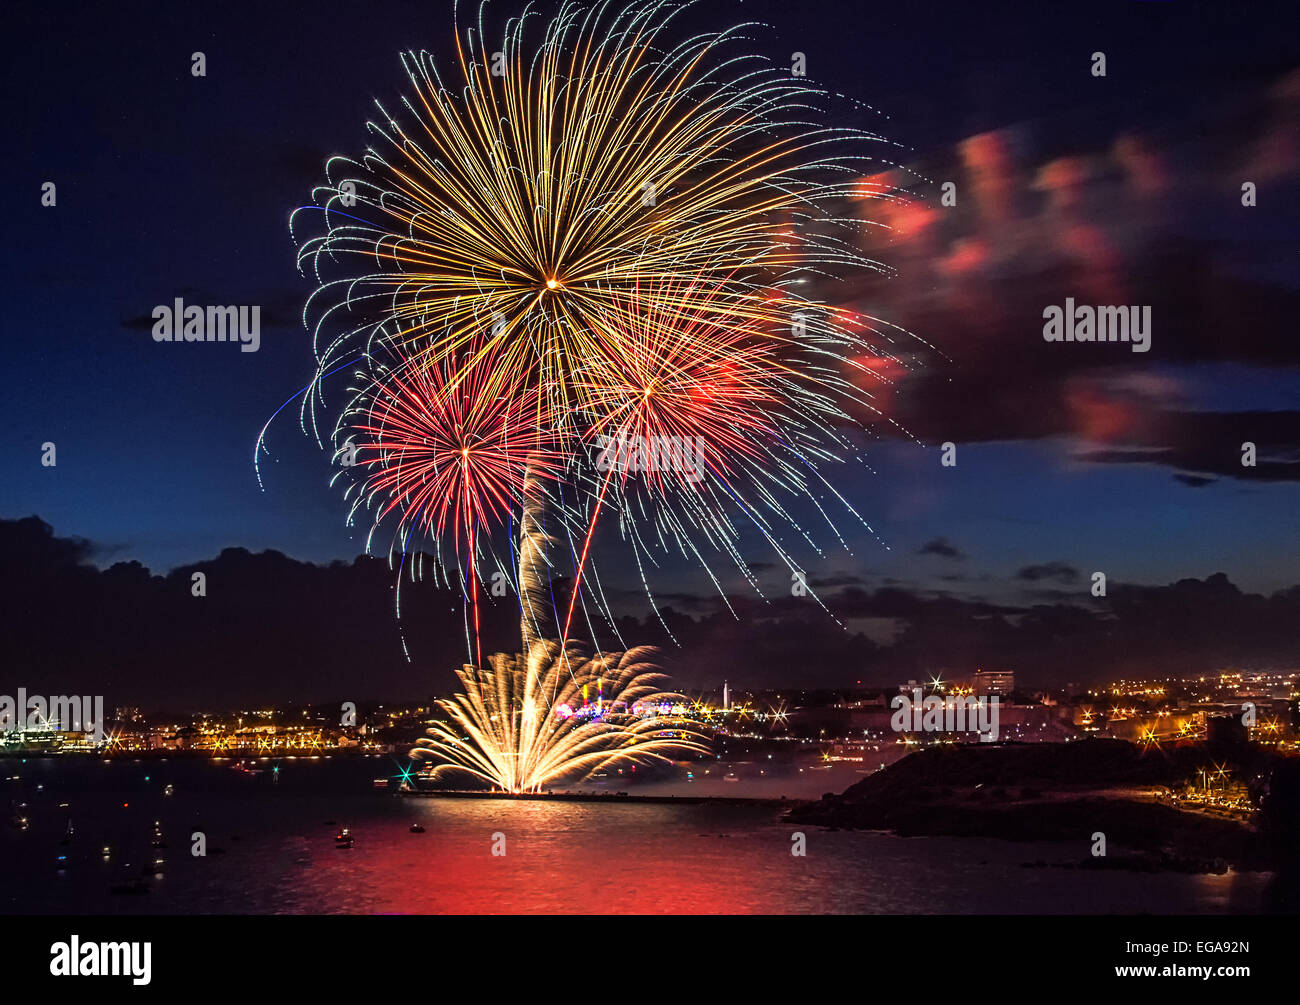 Fireworks,Thanksgiving,New Year eve,pyrotechnics,colors,light,show,joy